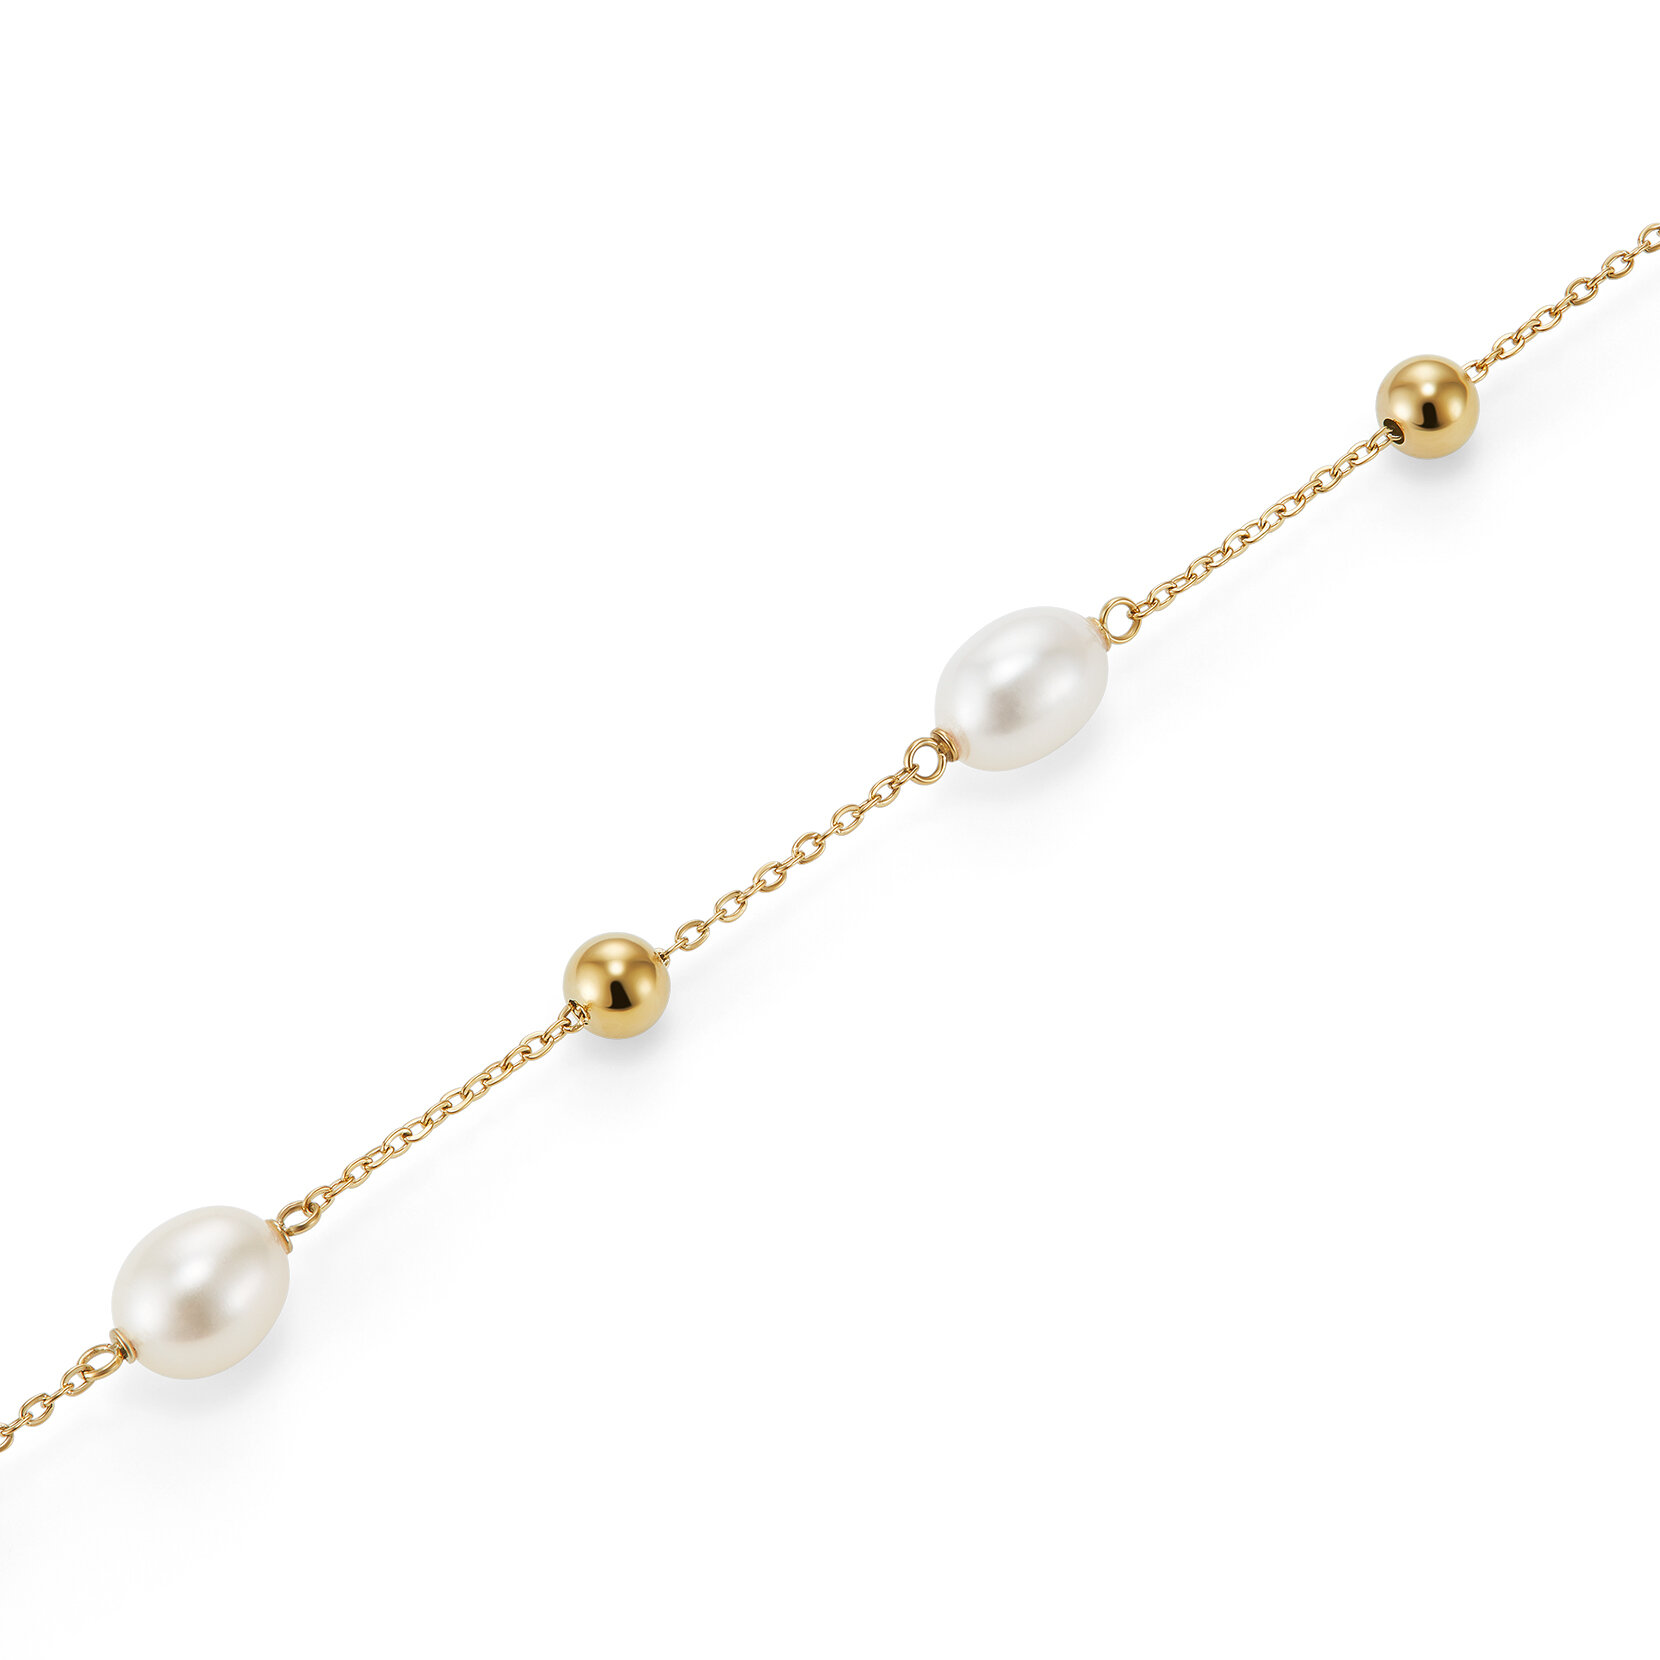 By The Sea Pearl Gold Plated Bracelet